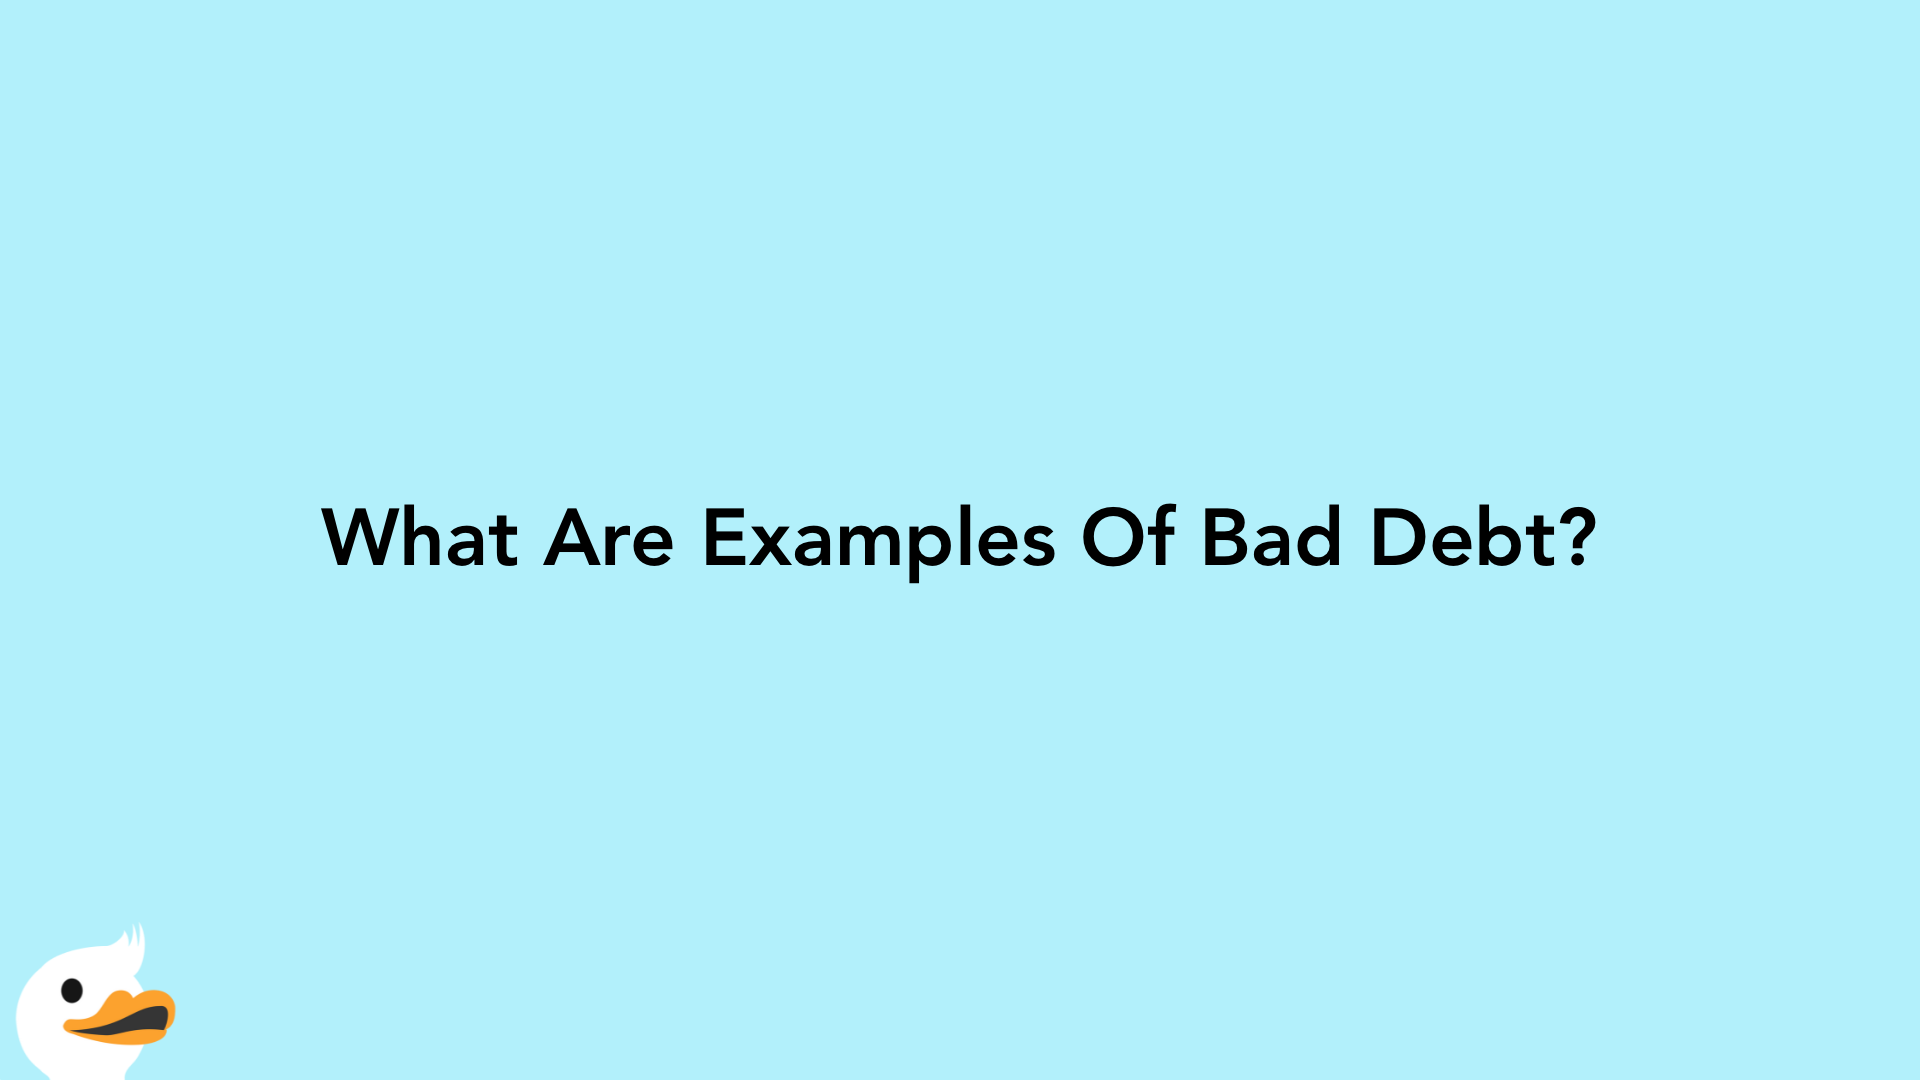 What Are Examples Of Bad Debt?